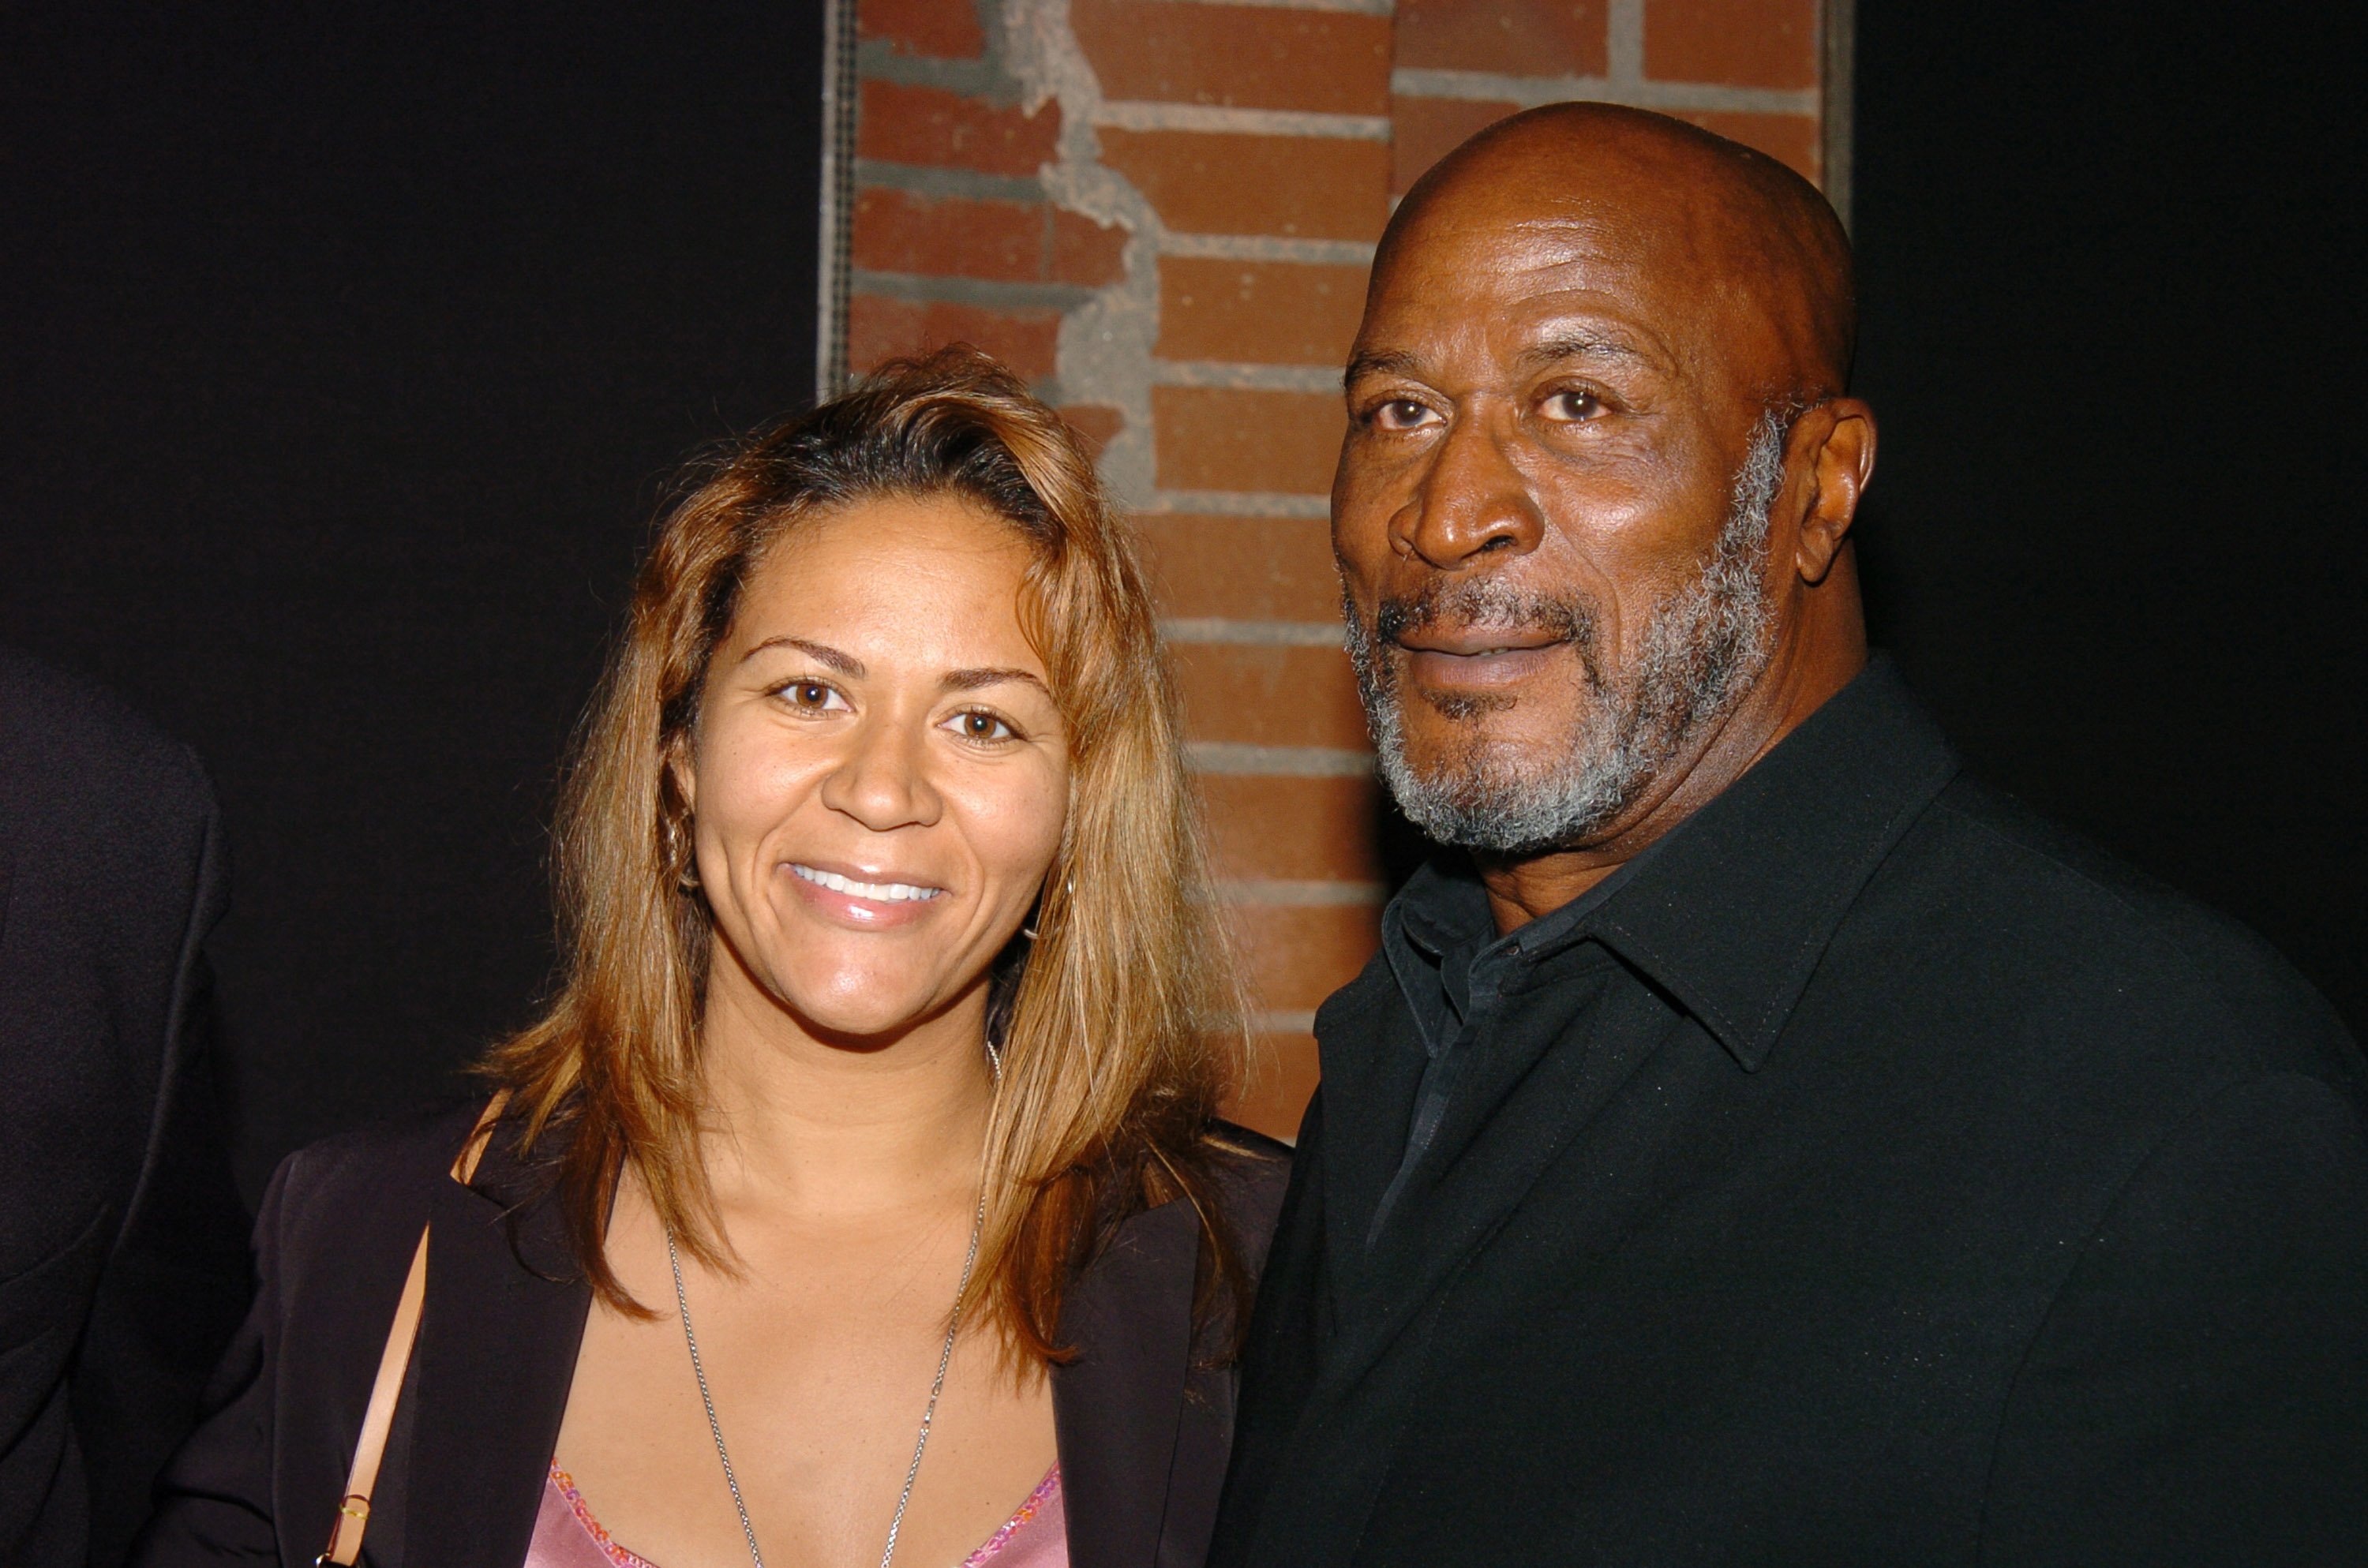 John Amos and Shannon Amos in November 2004 in Los Angeles, California | Photo: Getty Images